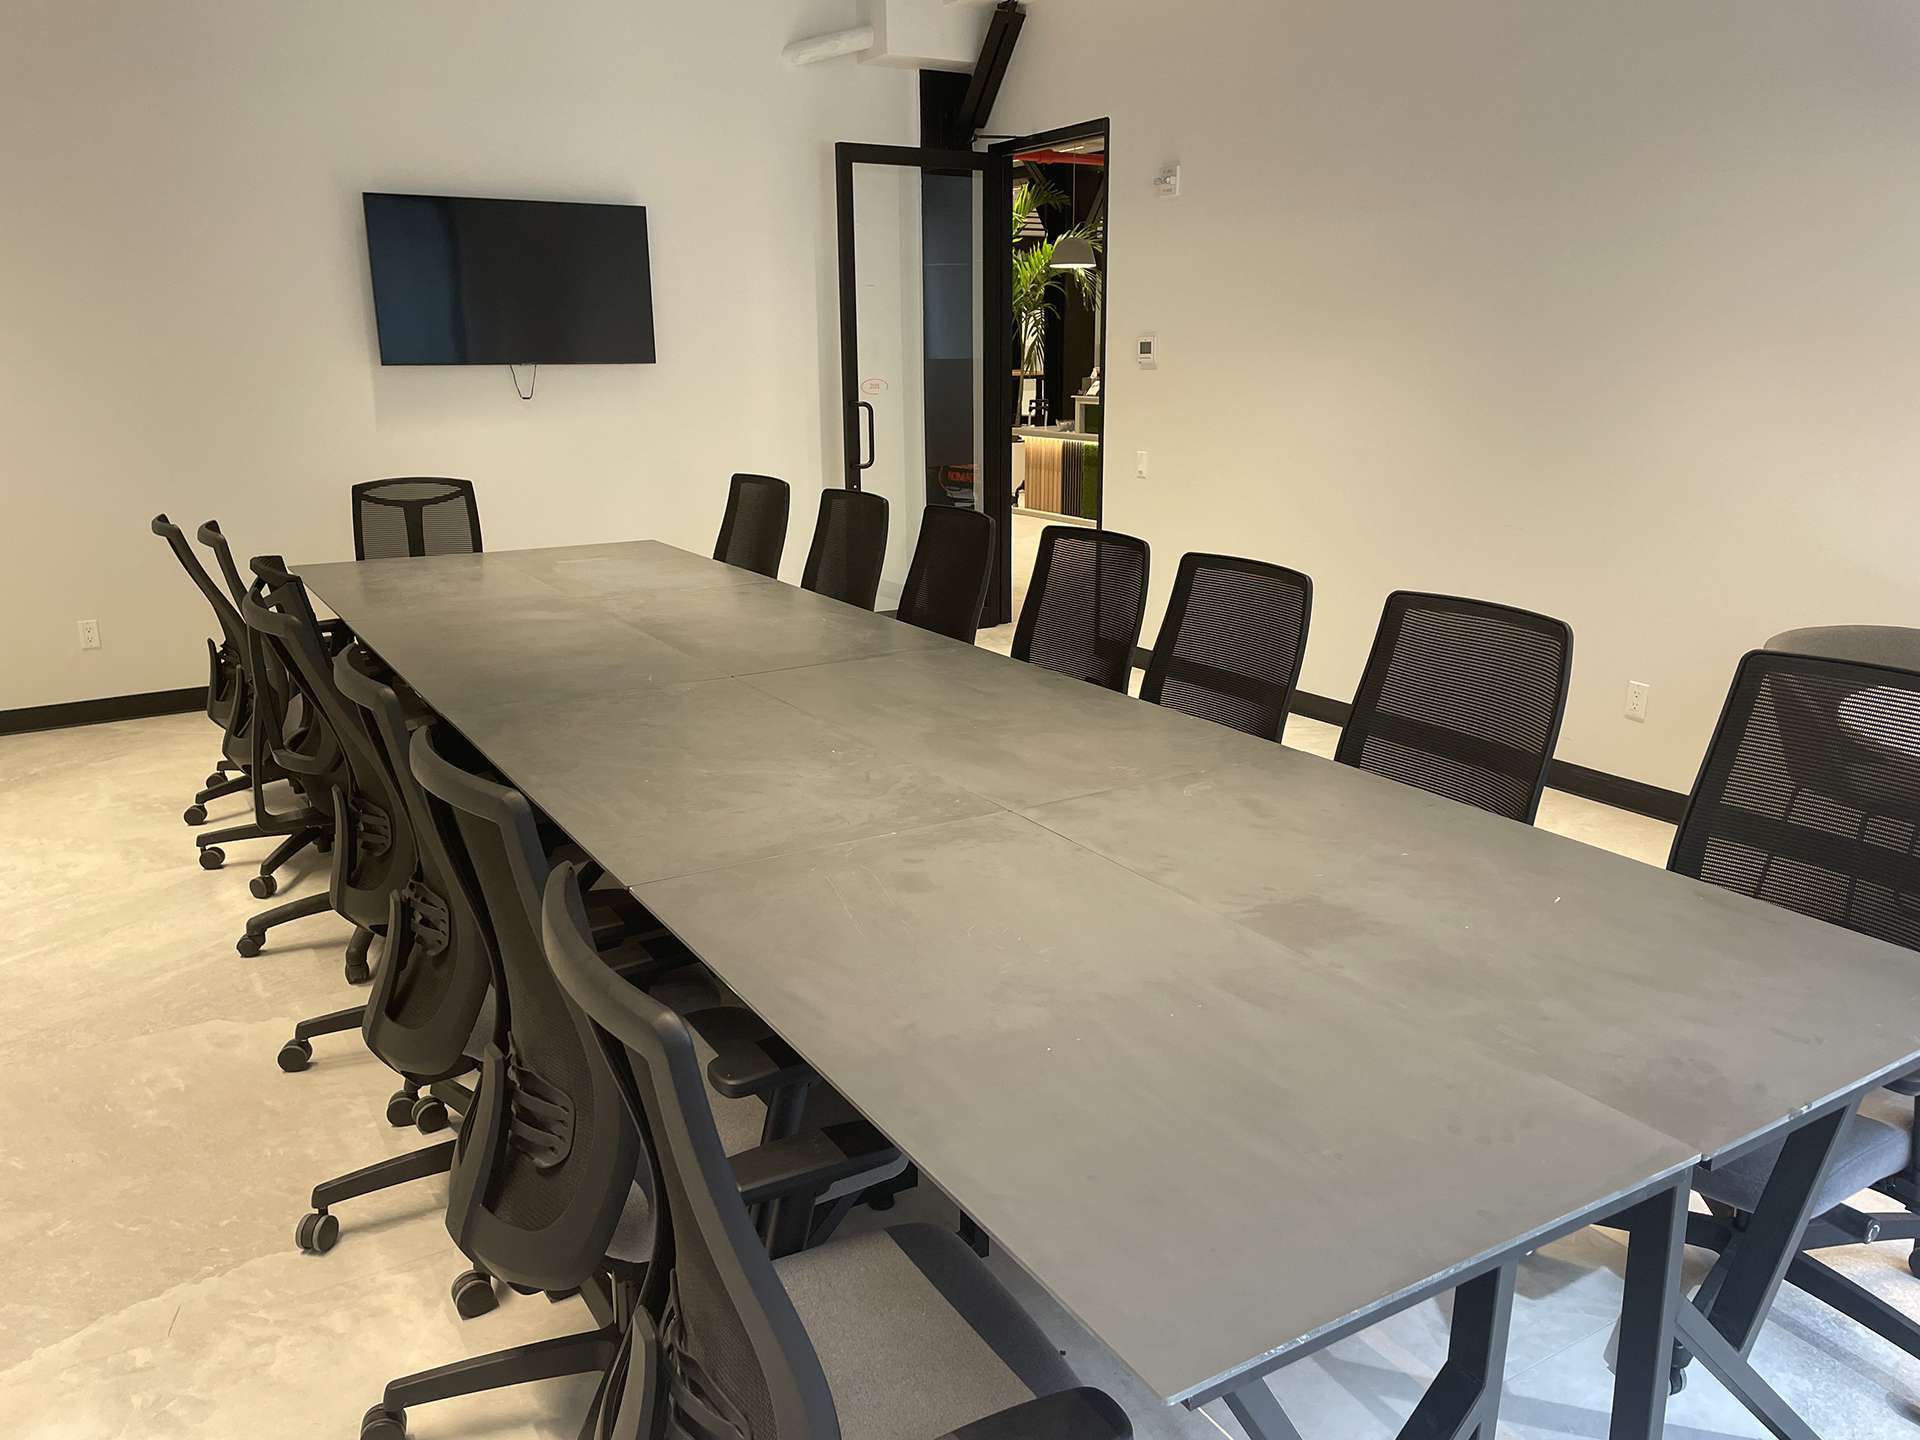 Cutting-edge conference room designed to foster innovation and idea sharing.